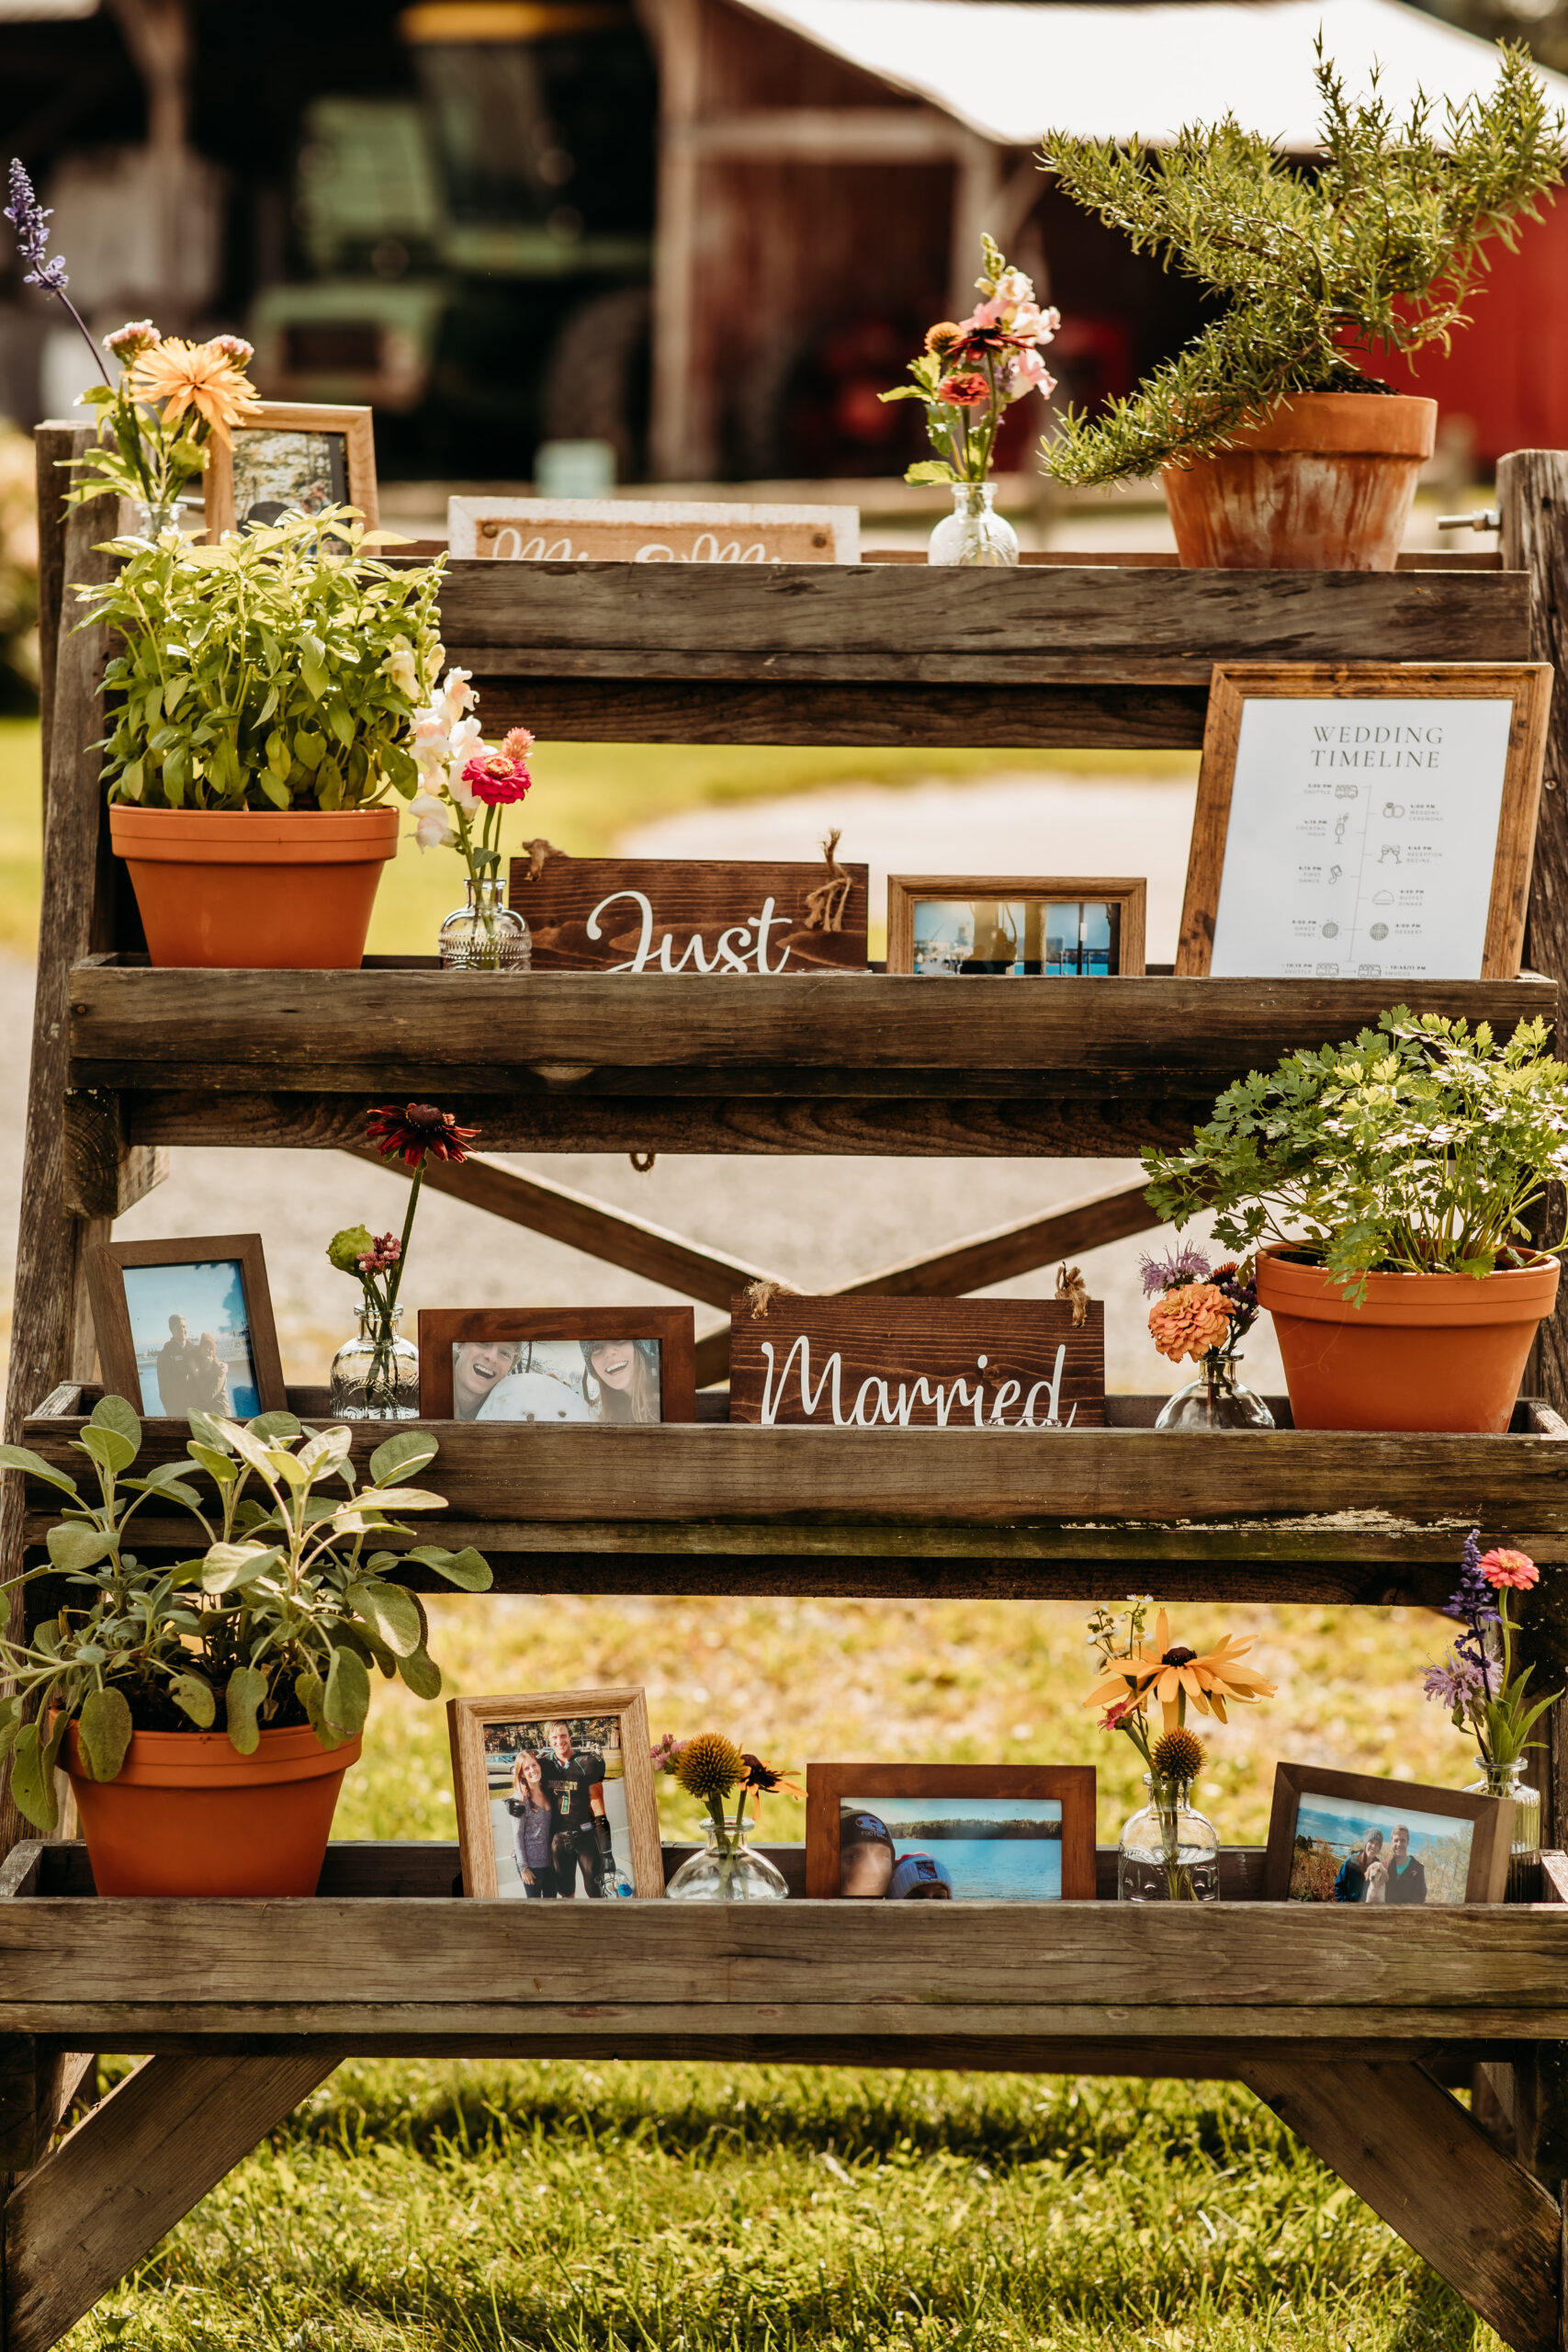 Rustic elements at Jess and Greg's farmers market themed wedding reception